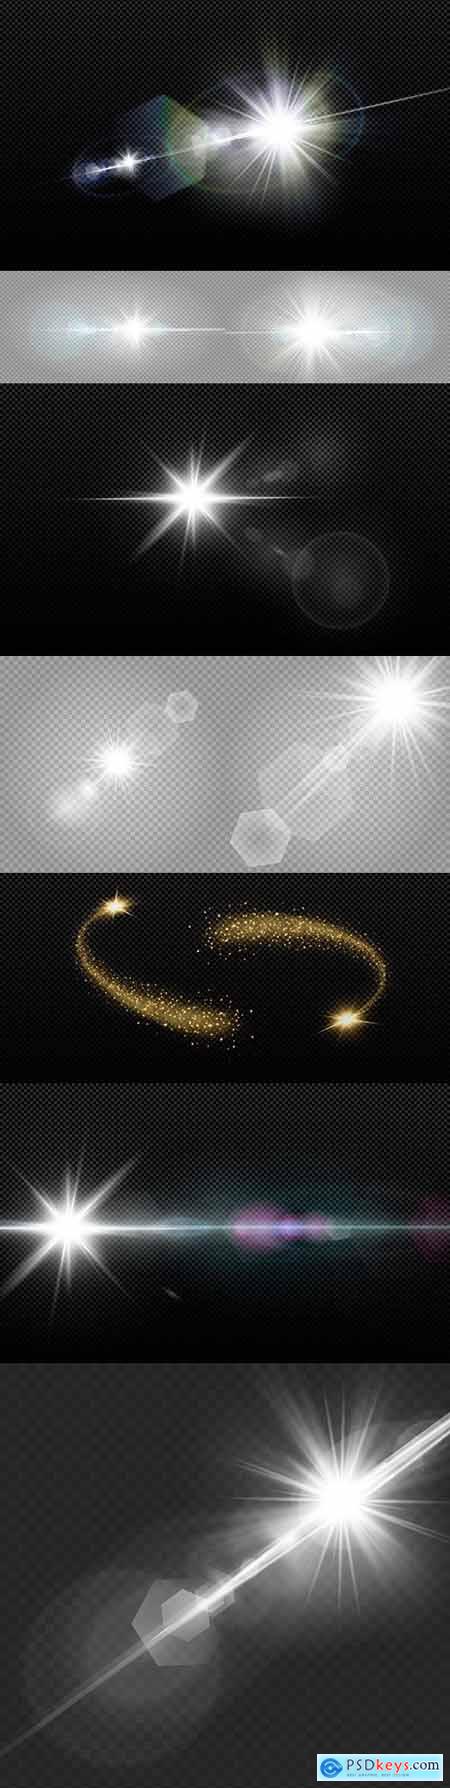 Shining stars and effects on transparent background